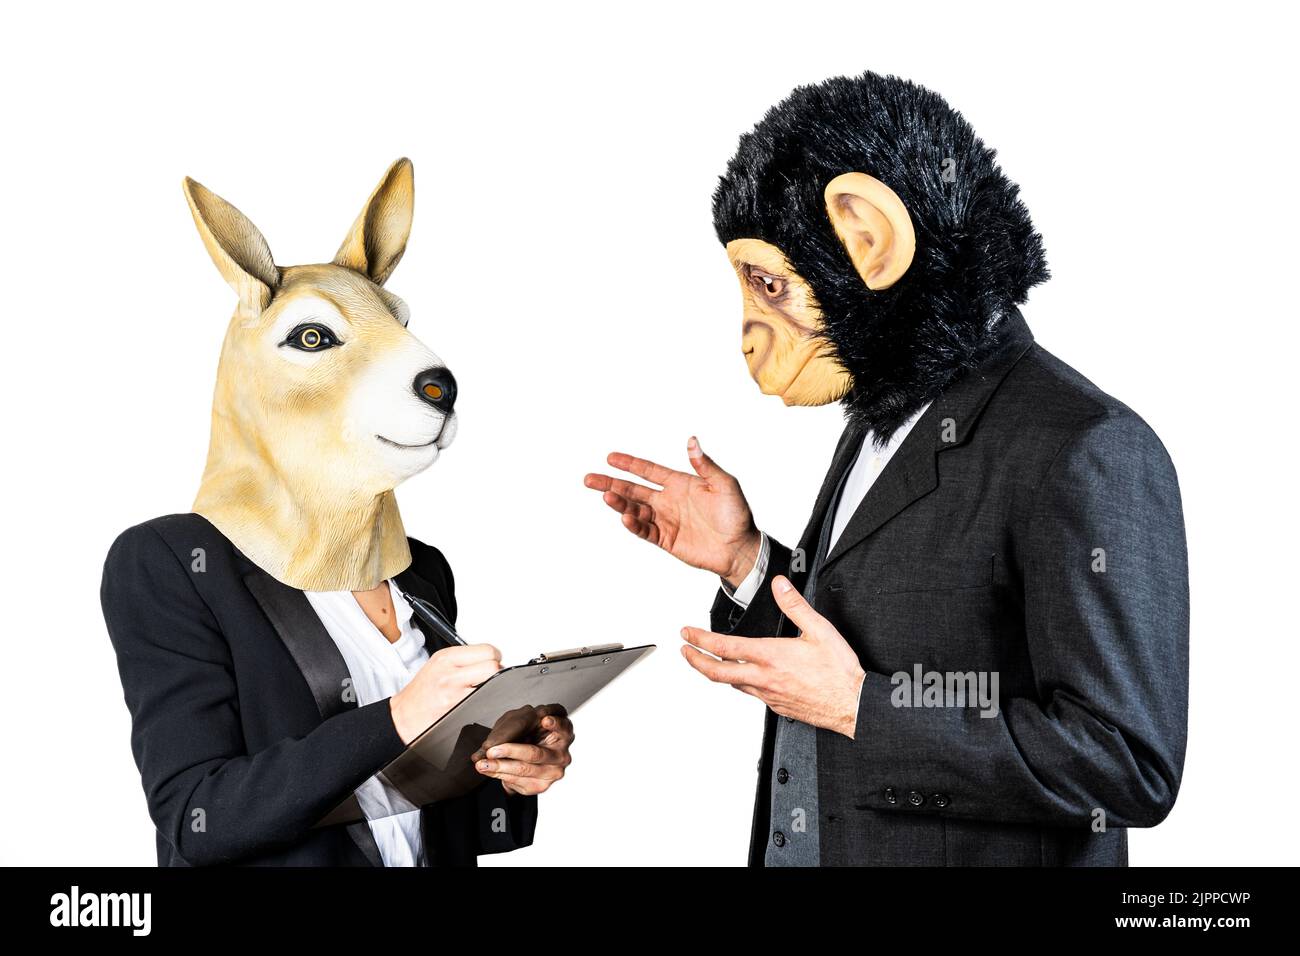 Entrepreneurs or colleagues doing business. Pen and documents on her hands, deal concept. Kangaroo and monkey masks. Isolated white background Stock Photo